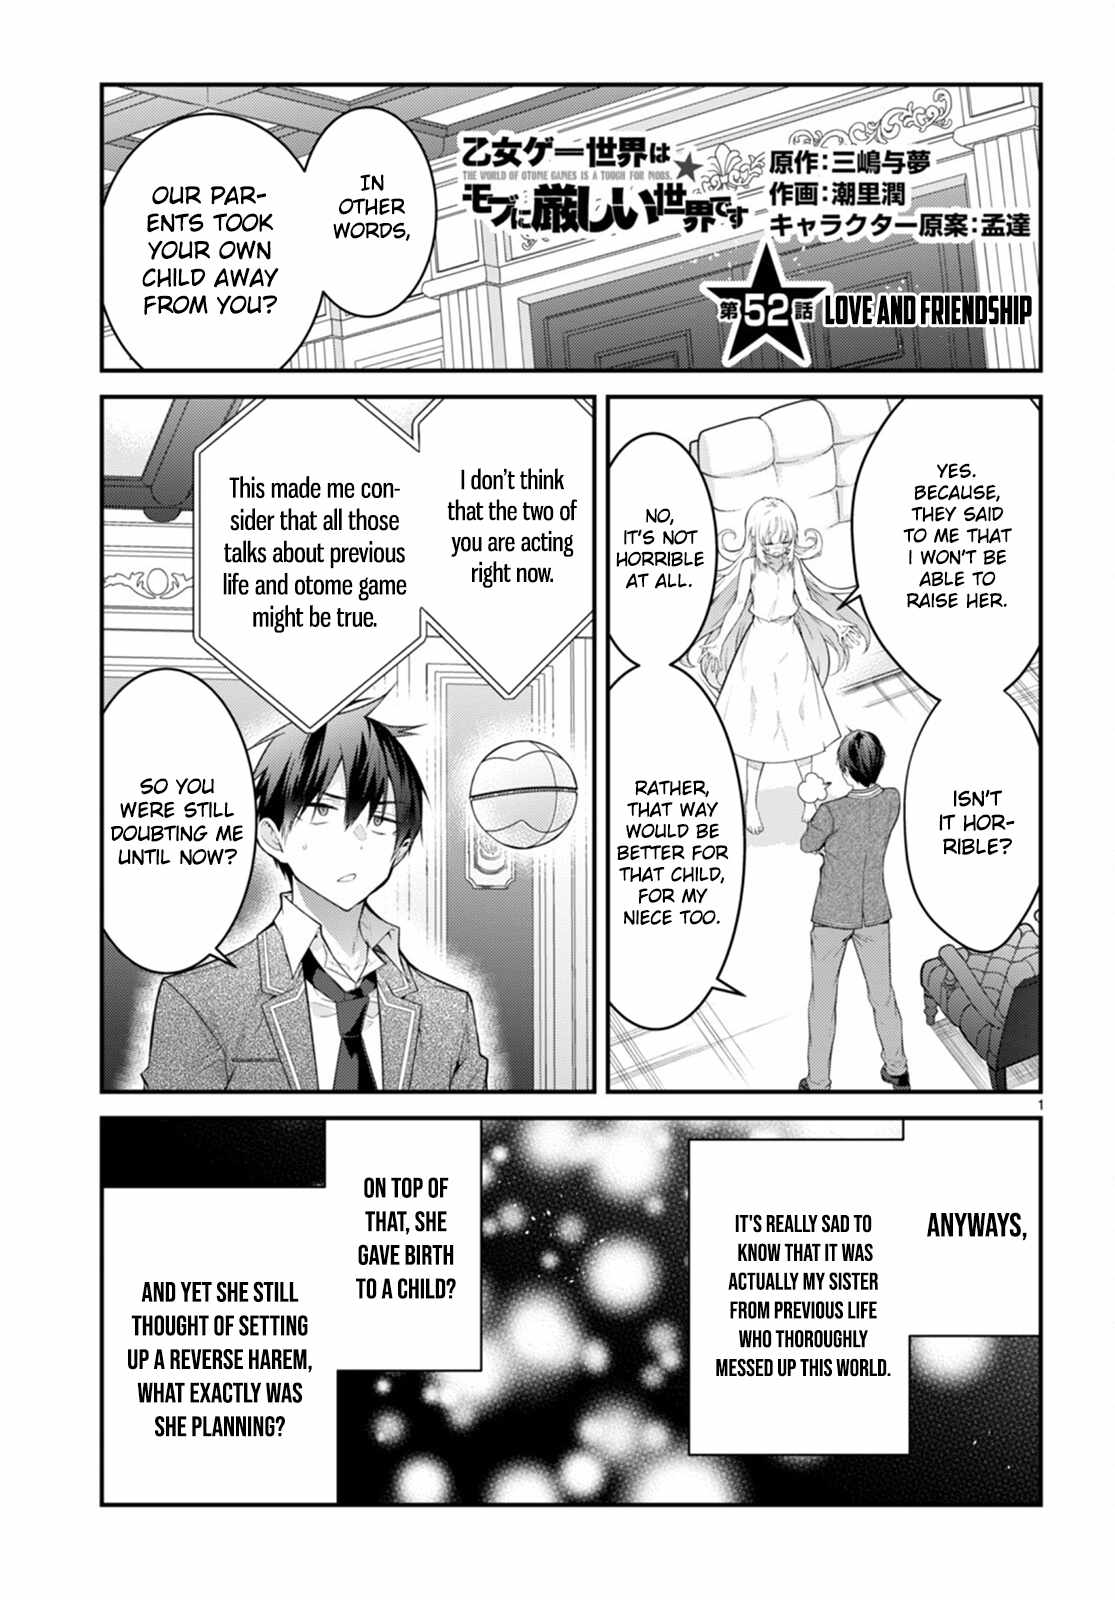 The World Of Otome Games Is Tough For Mobs - 52 page 1-e7b1ca65